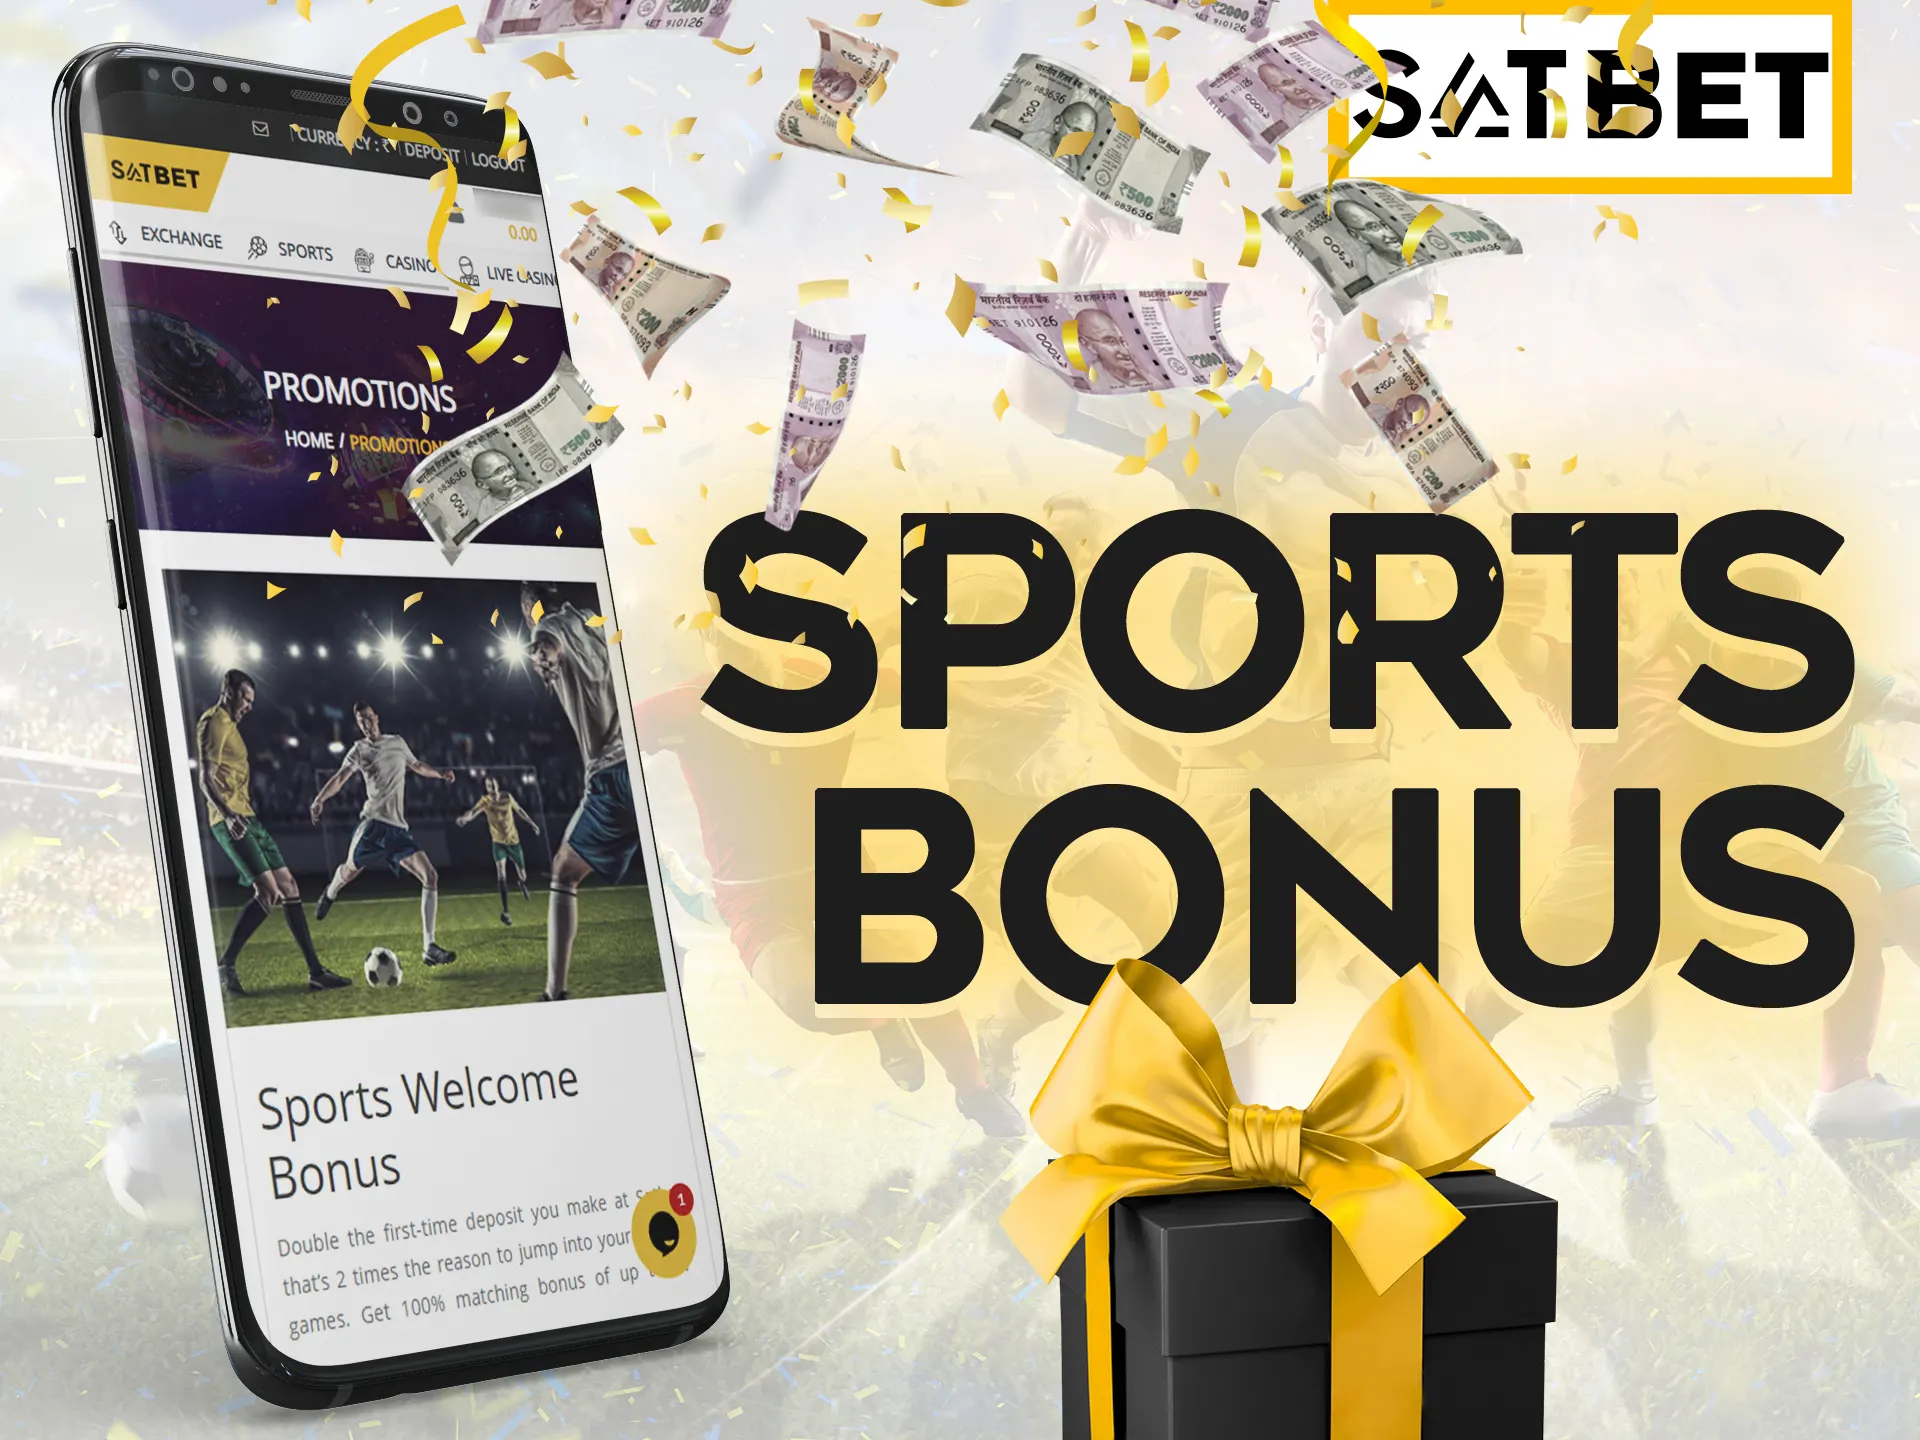 Get your Satbet sports bonus by betting on different sports.